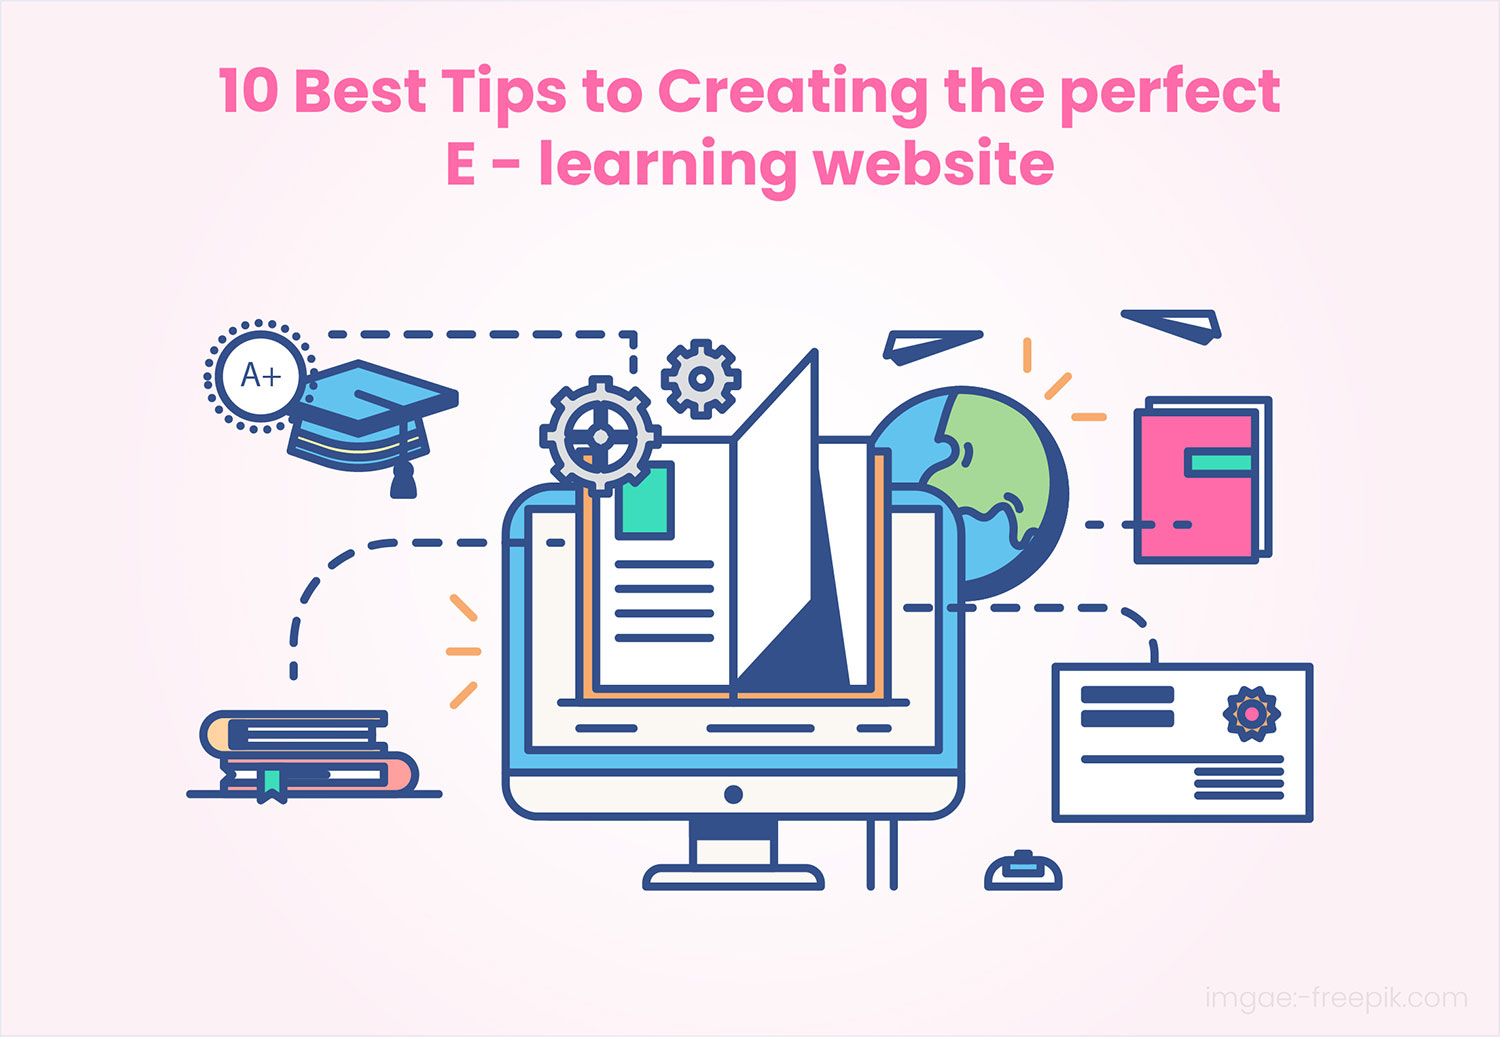 10 Essential Tips to Create a Perfect E-Learning Website